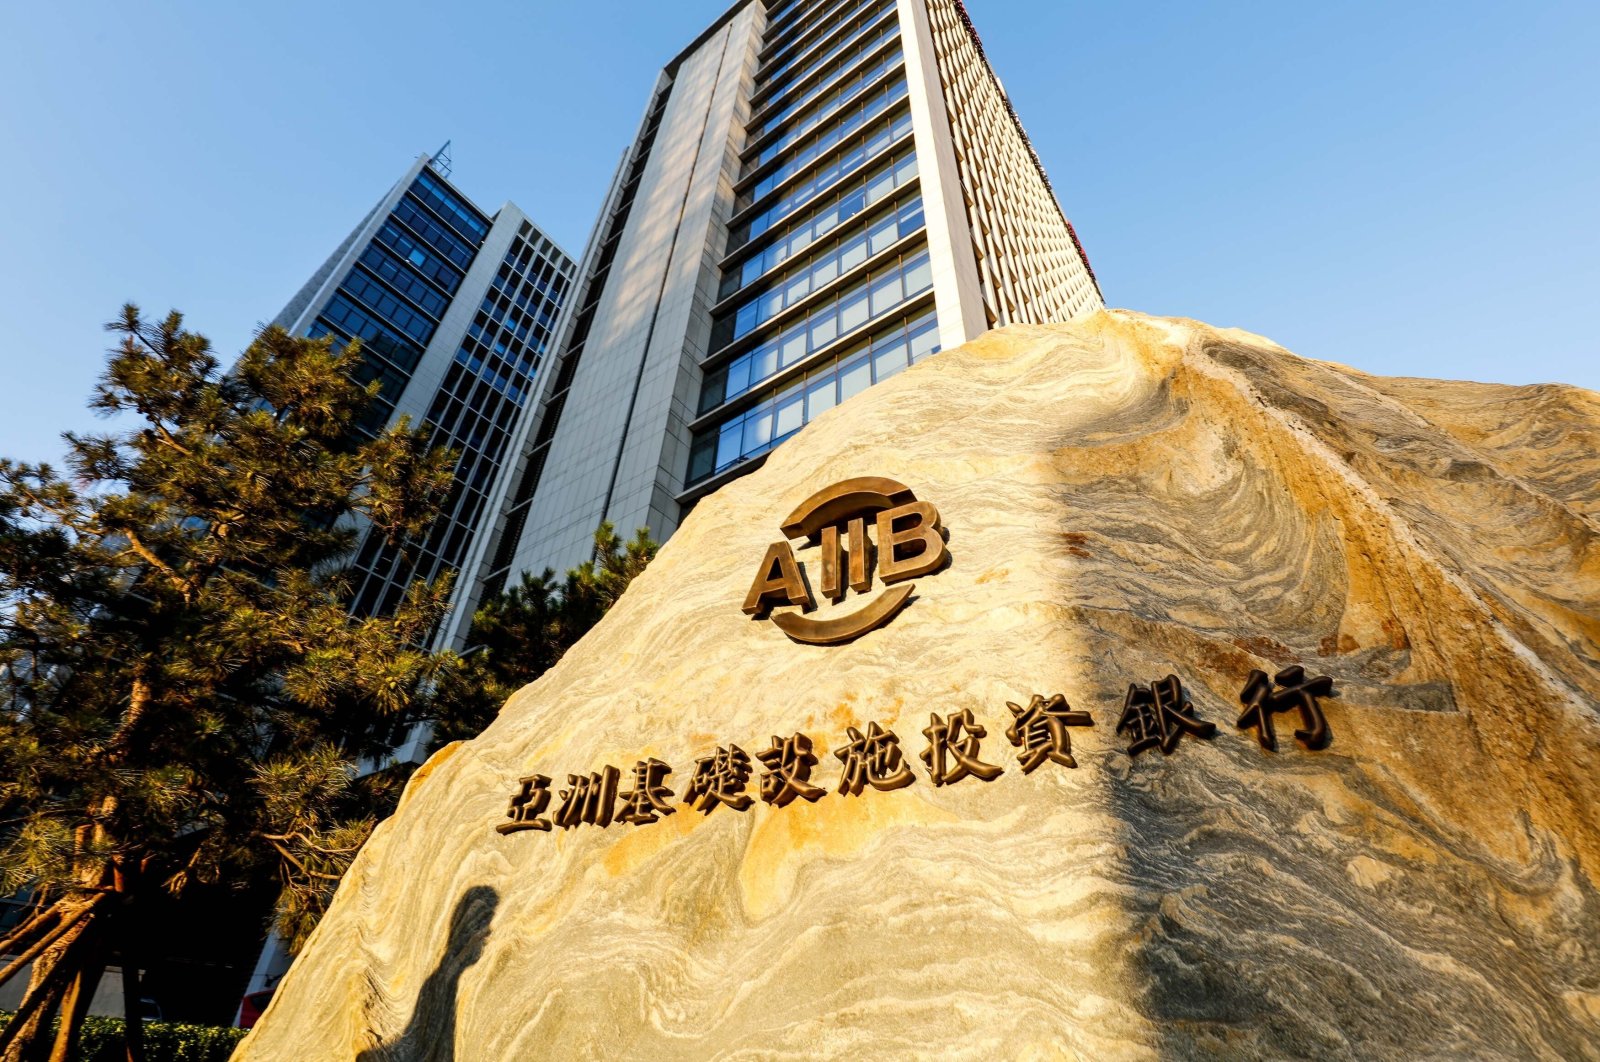 A memorial stone in front of the headquarters of the AIIB, Beijing, China, Sept. 28, 2016. (Shutterstock Photo)